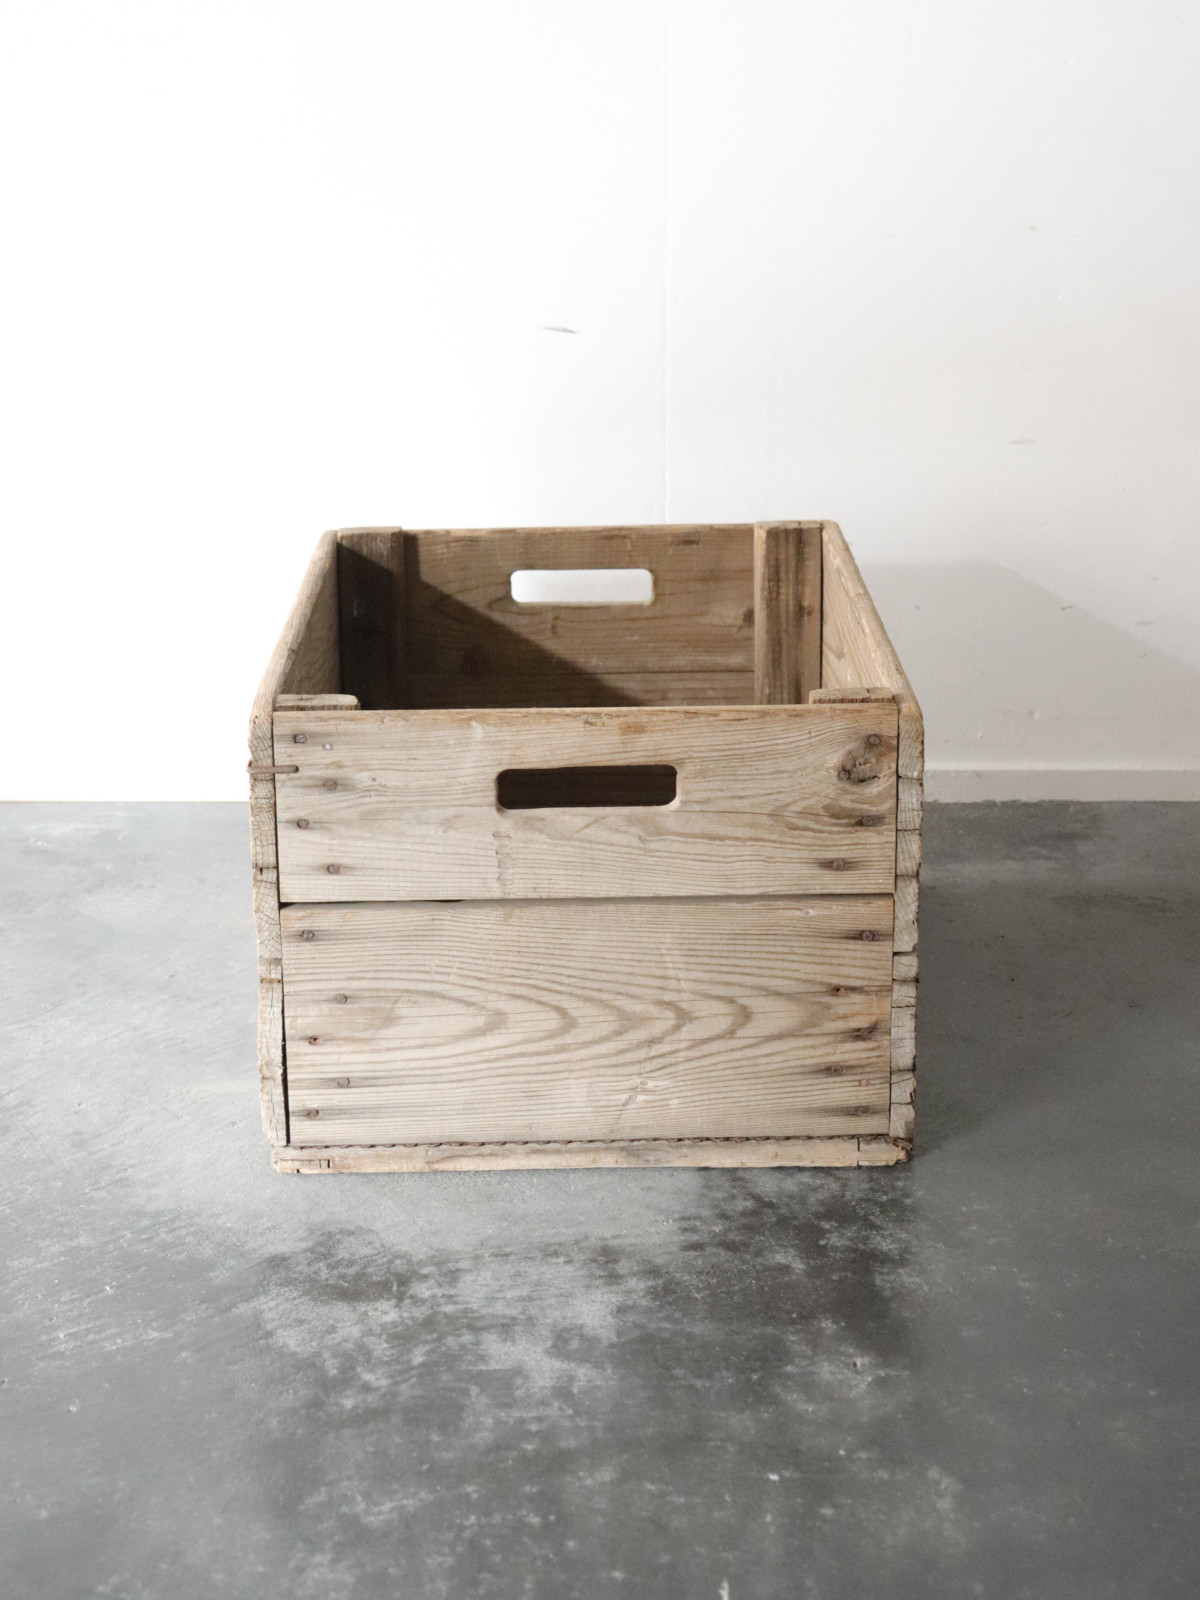 Crate,Wood cabbage box,vintage, USA,